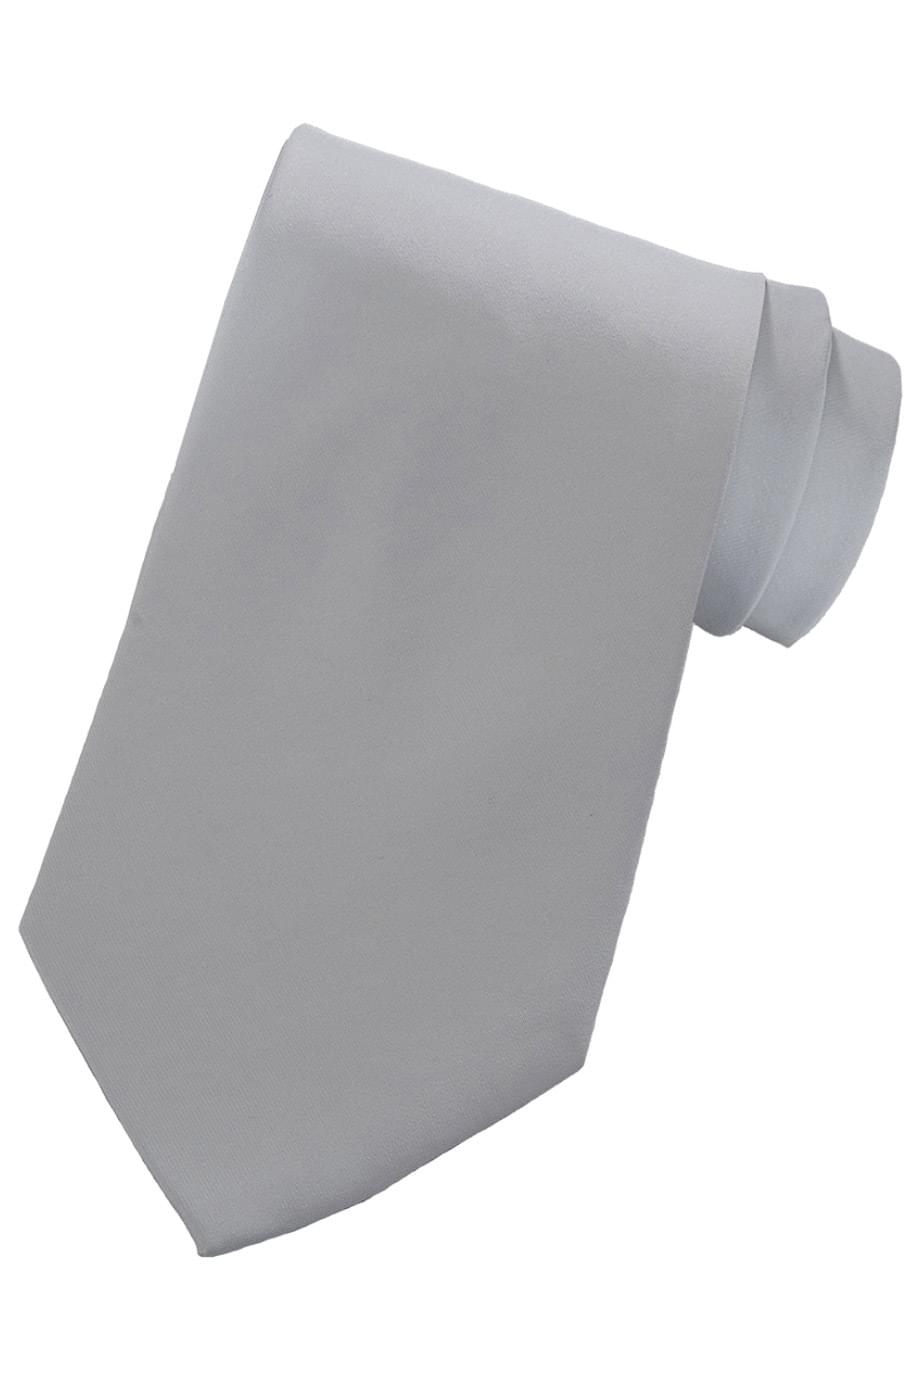 SOLID TIE - TRADITIONAL WIDTH